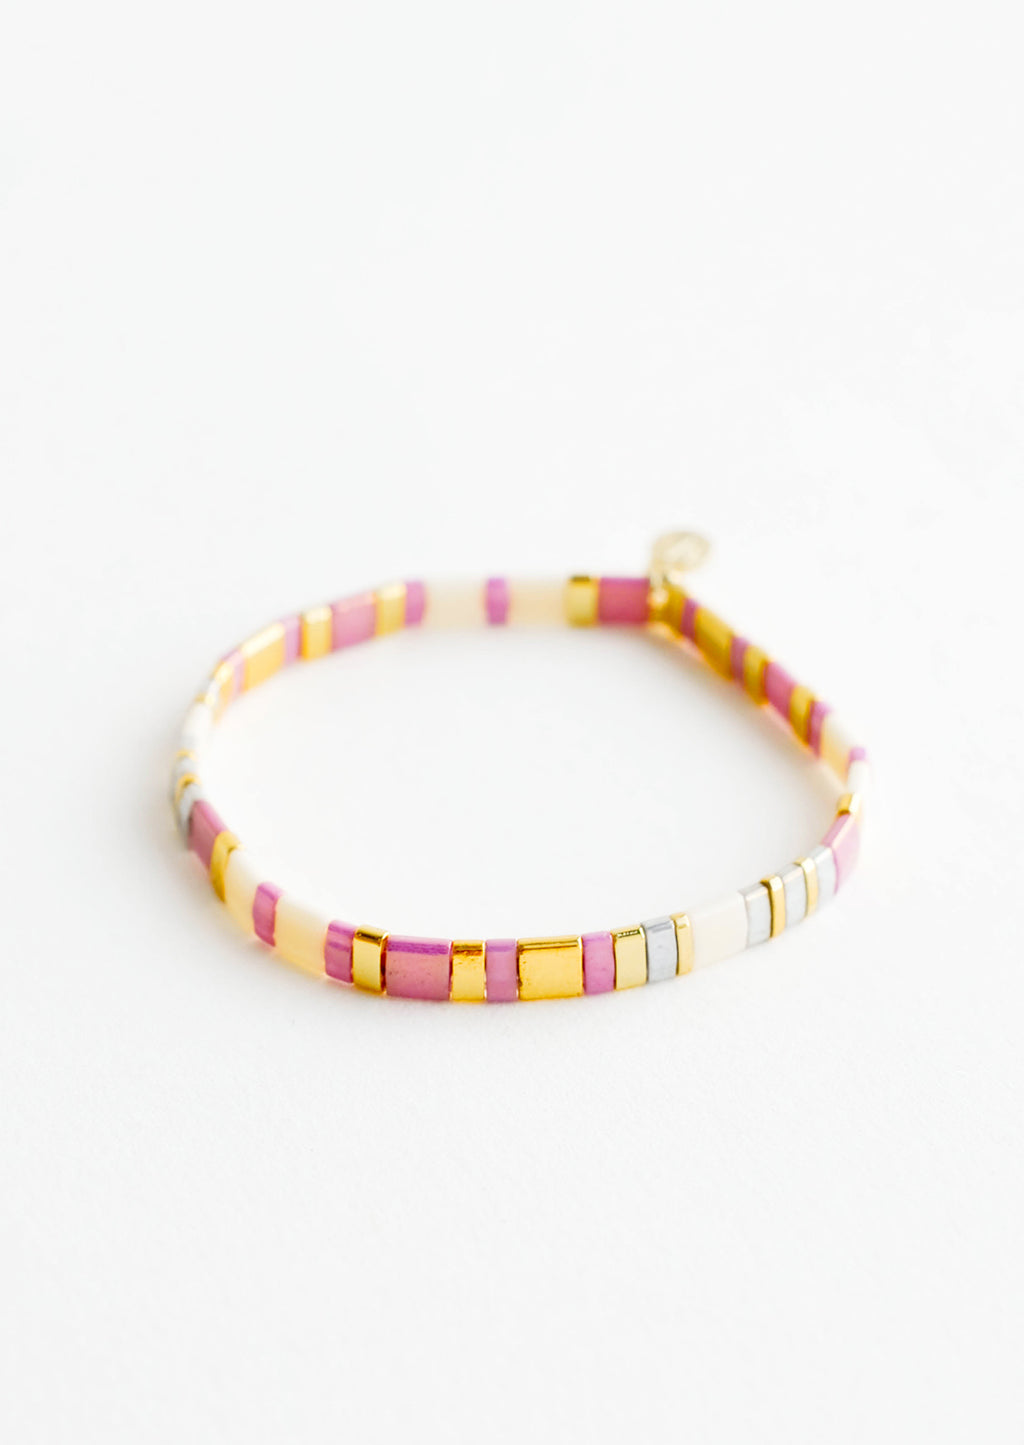 Lavender Cream: Bracelet featuring flat multicolor purple and cream glass beads interspersed with flat gold bead on an elastic cord.